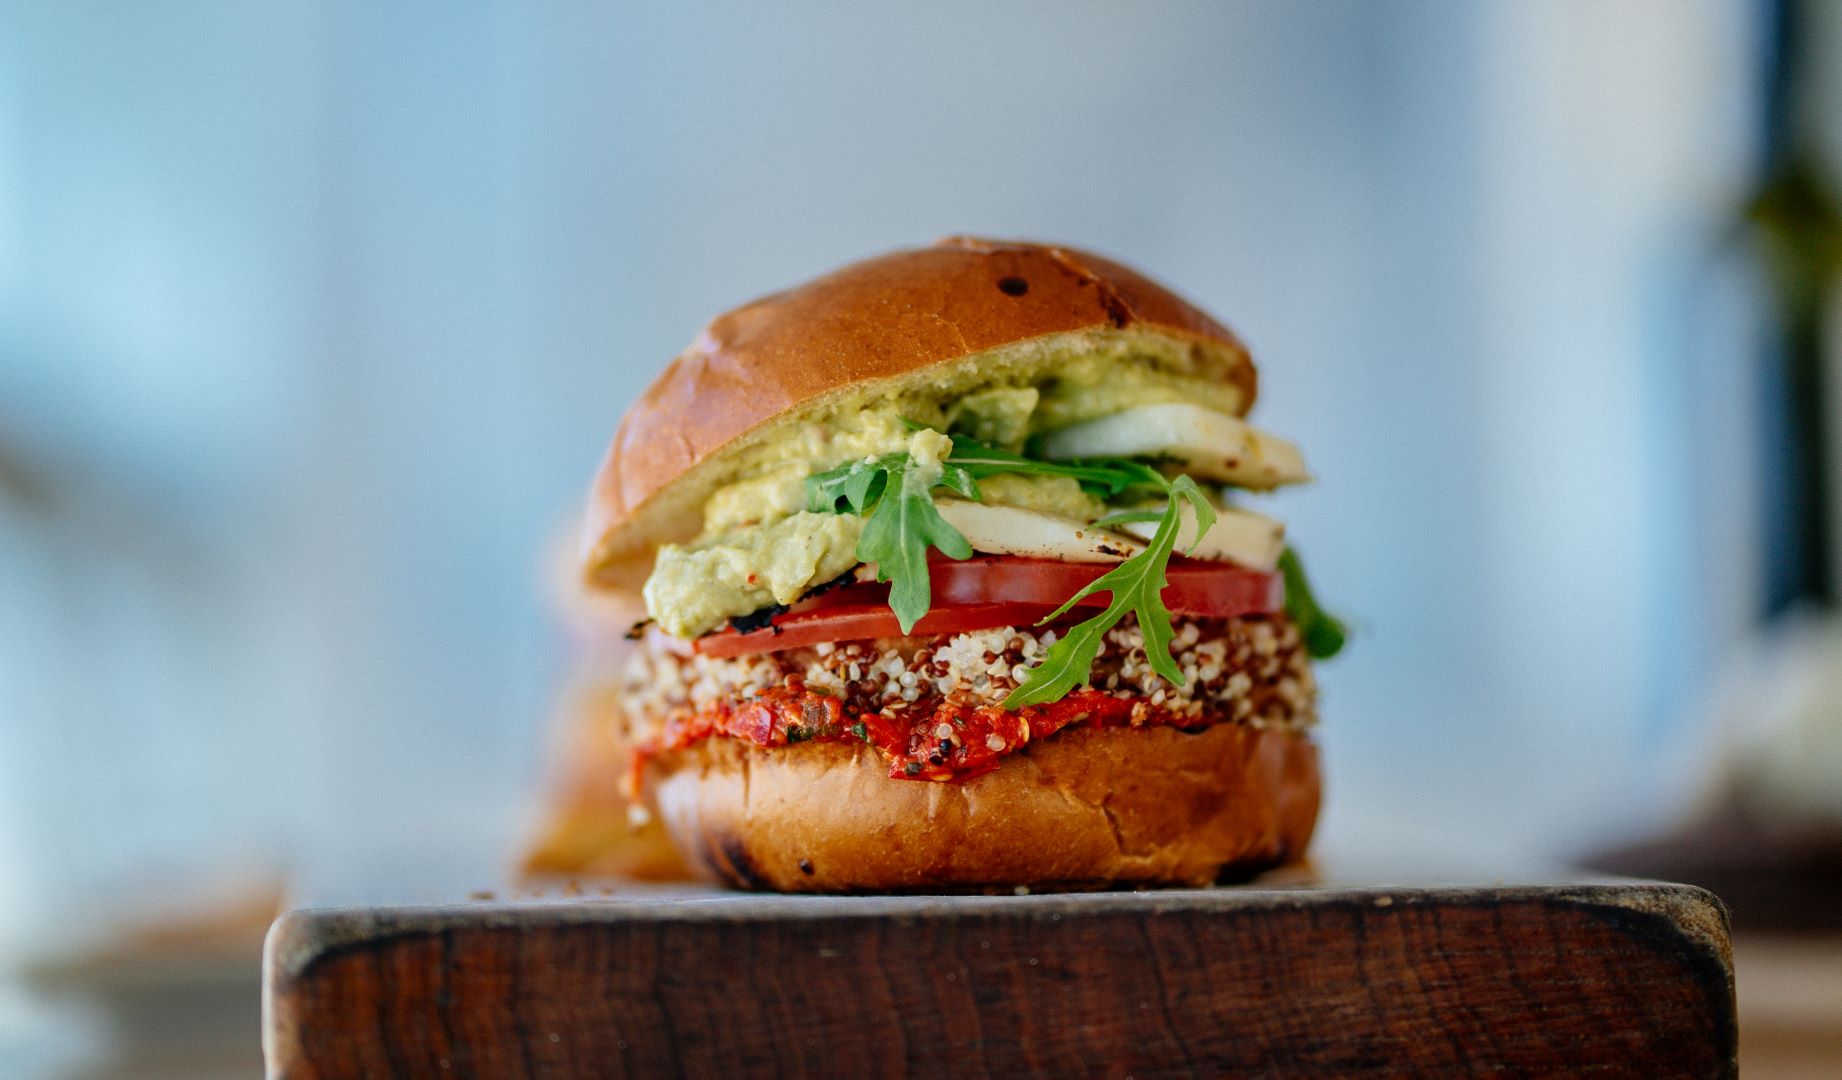 a vegetarian burger with a quinoa patty and lots of vegetable fixins.